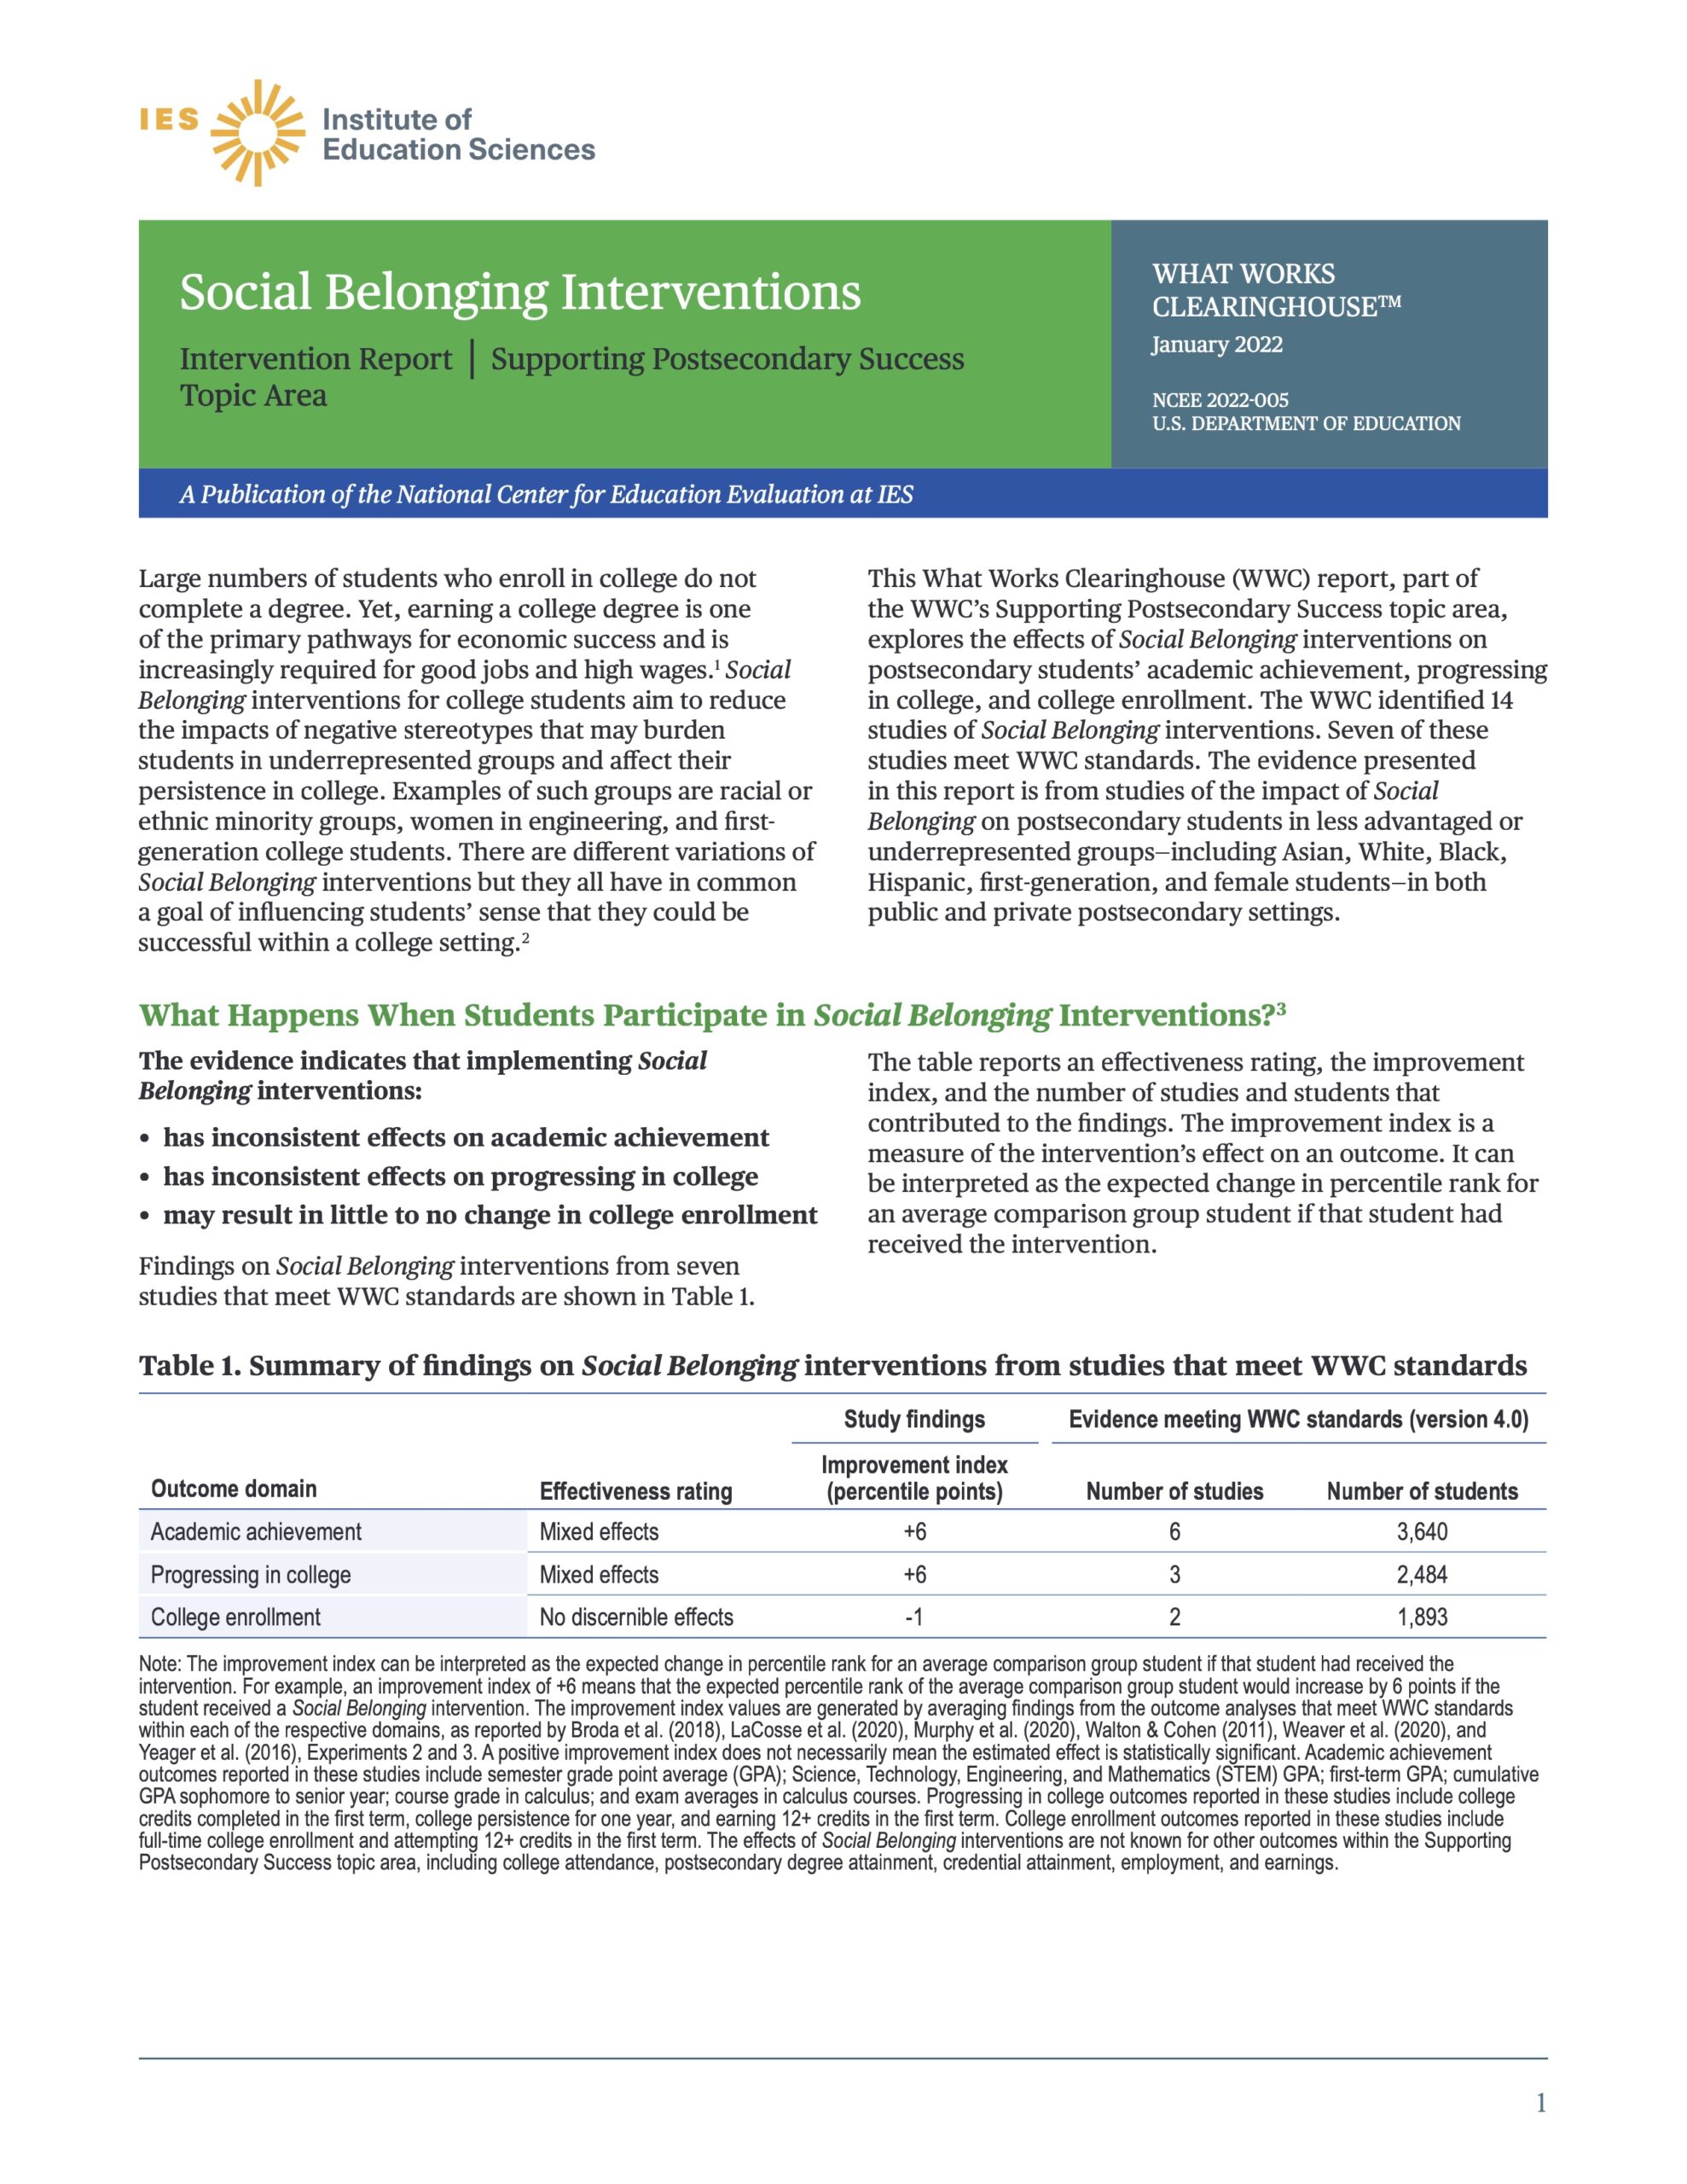 Thumbnail of cover: Intervention Report: Social Belonging Interventions